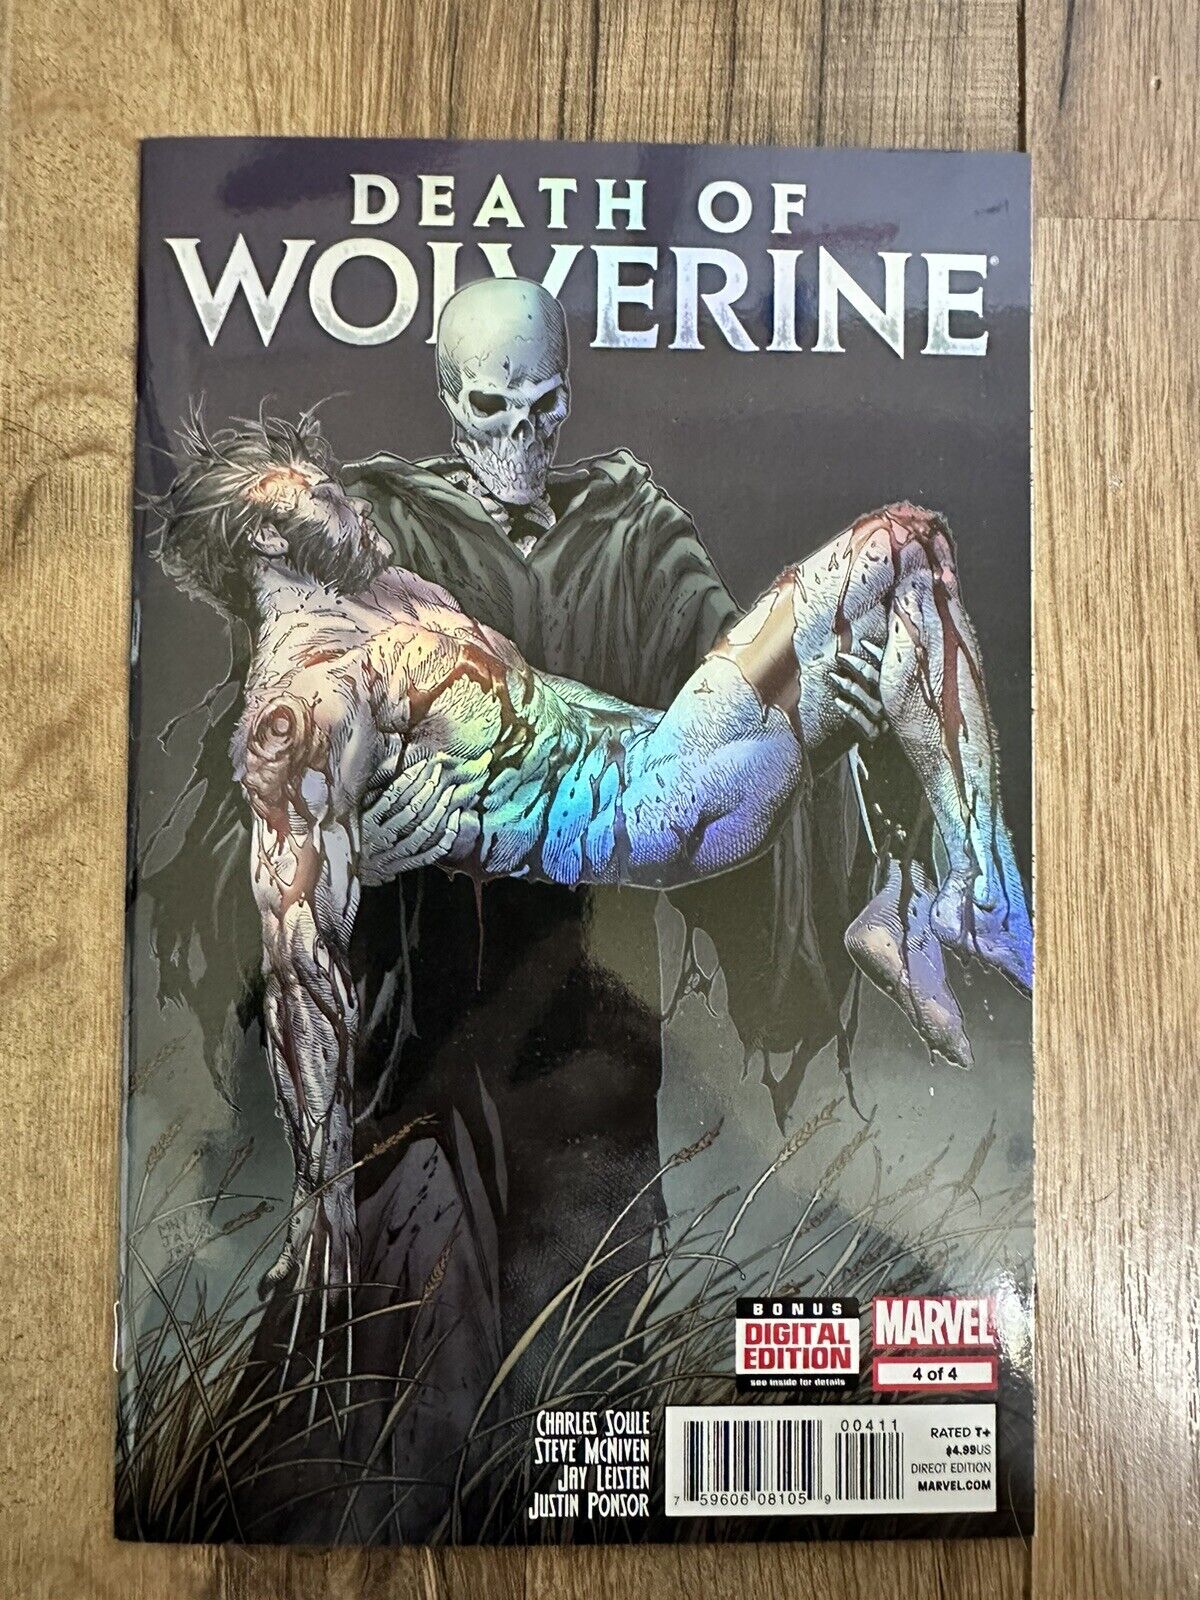 DEATH OF WOLVERINE #4 (2014) NM - MCNIVEN COVER A - FIRST PRINT